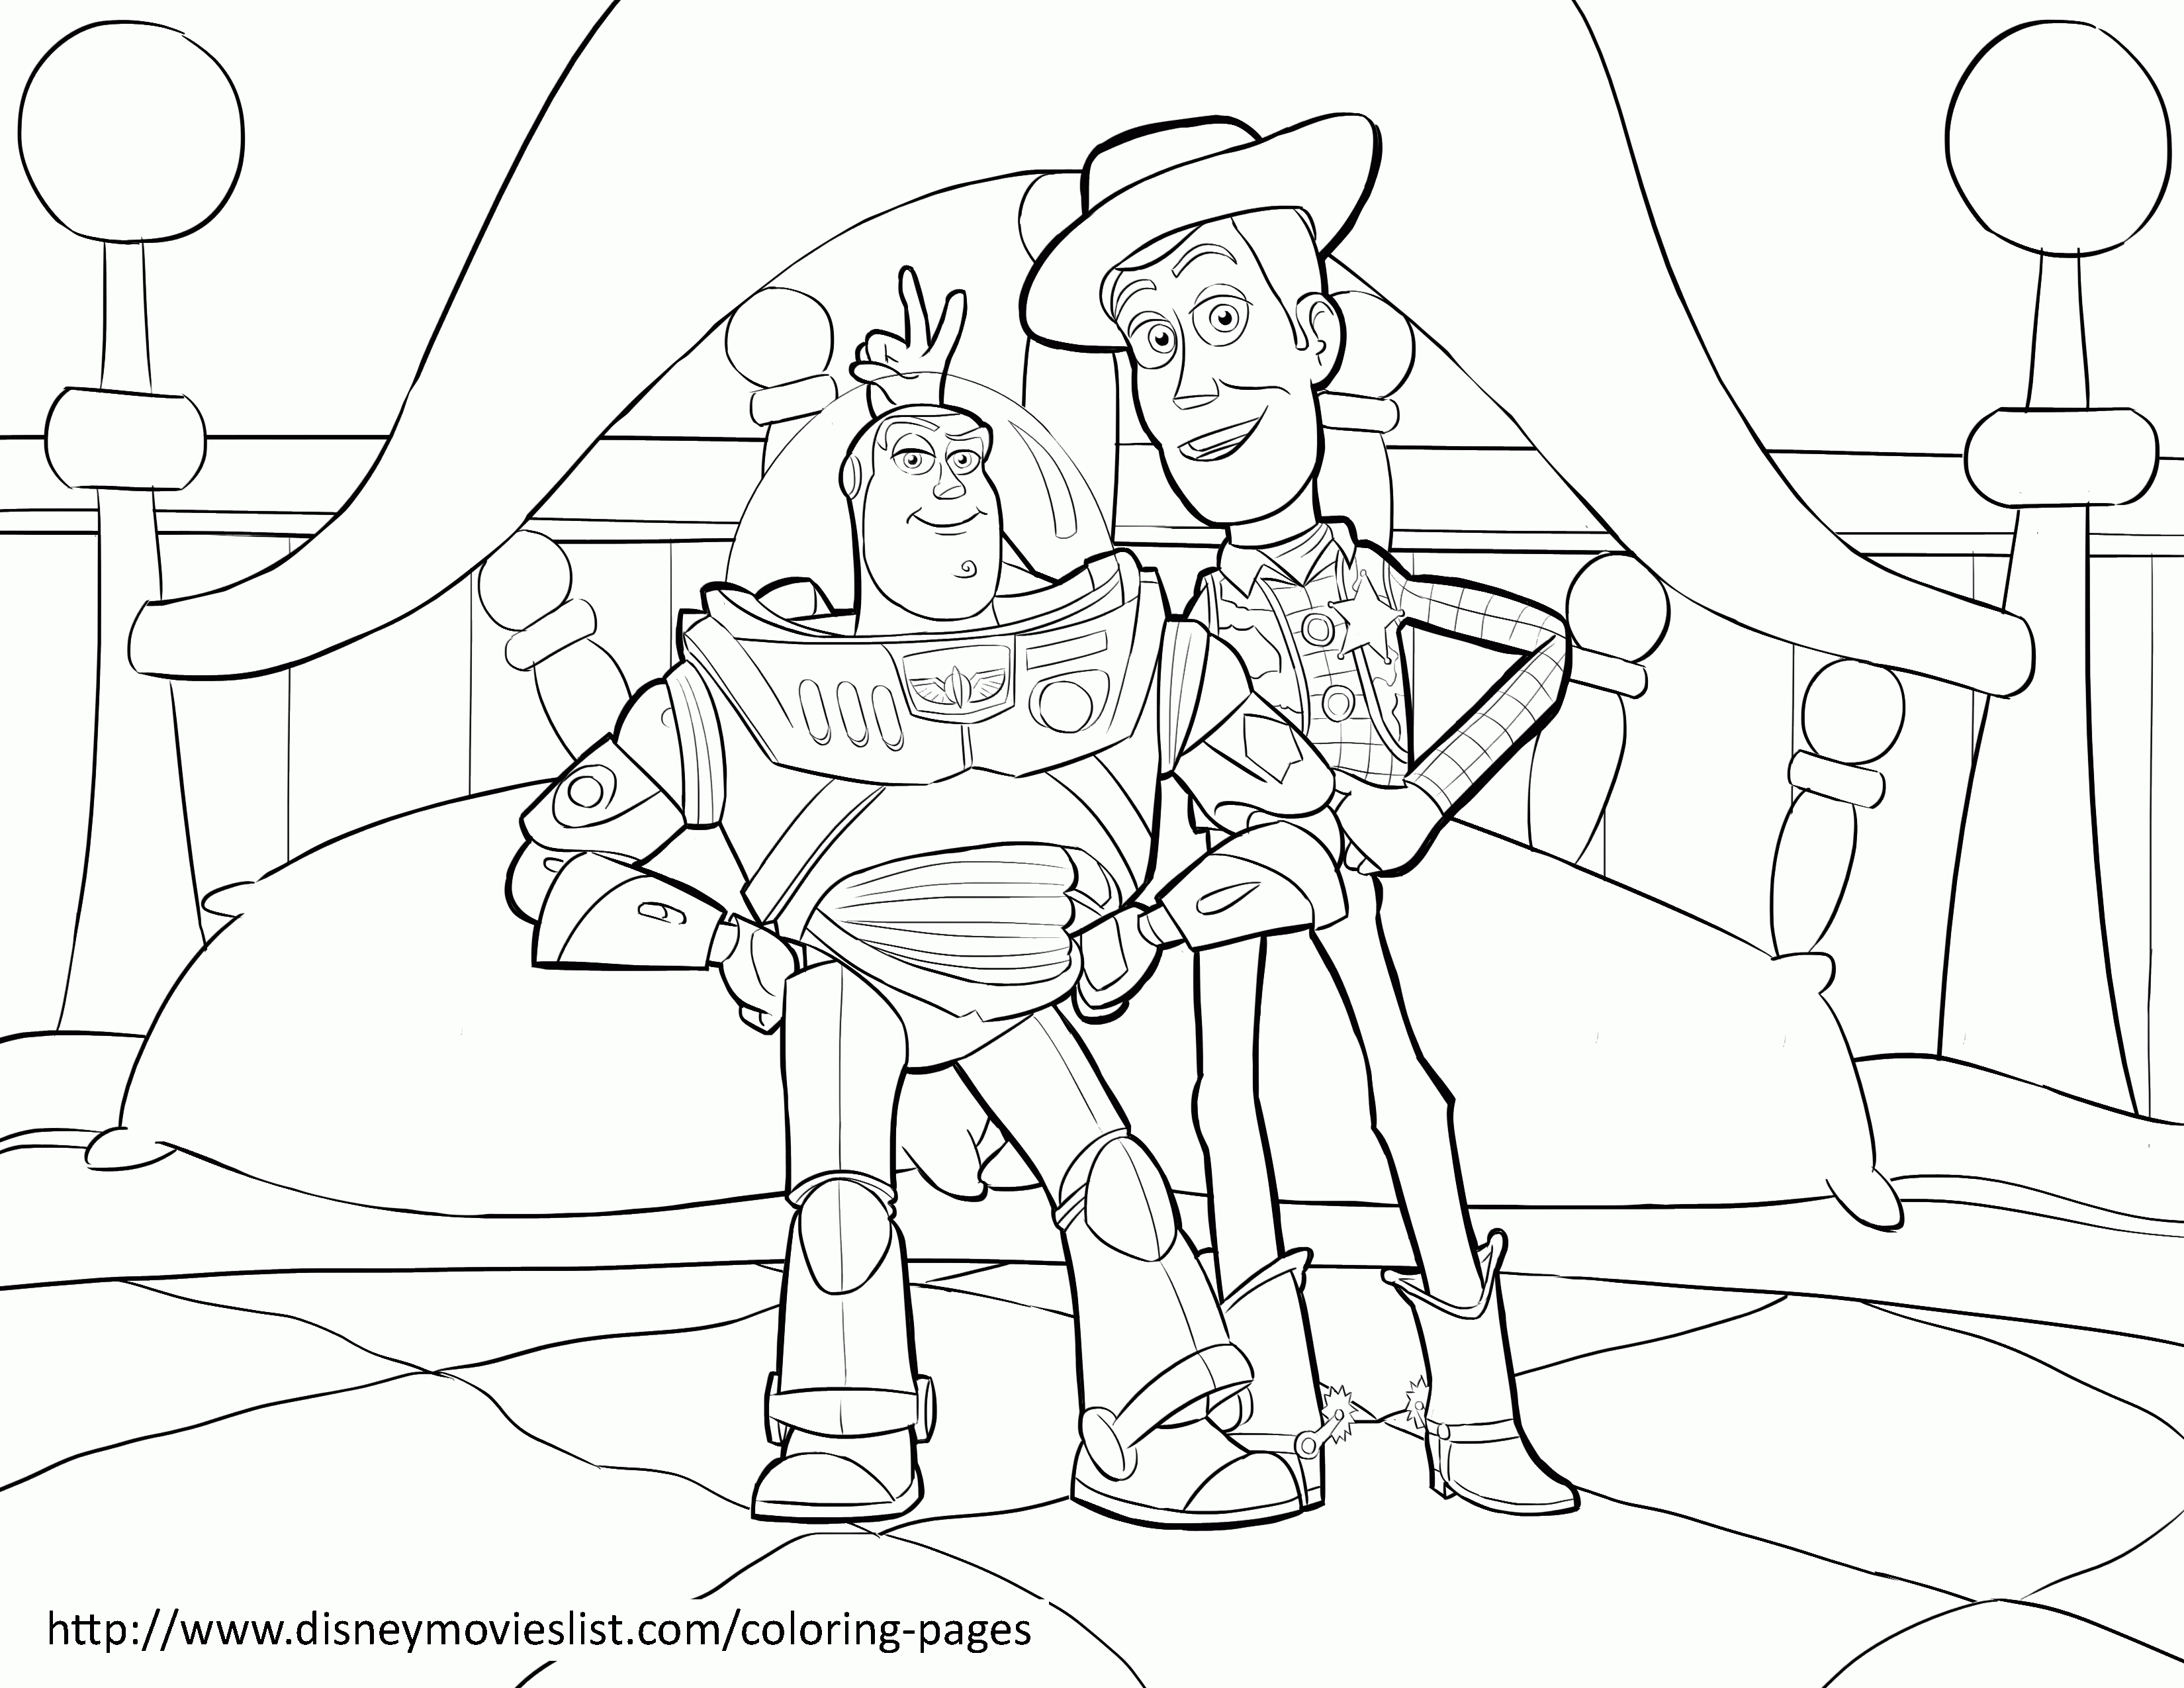 Free Printable Disney Toy Story Coloring Pages   Coloring Home